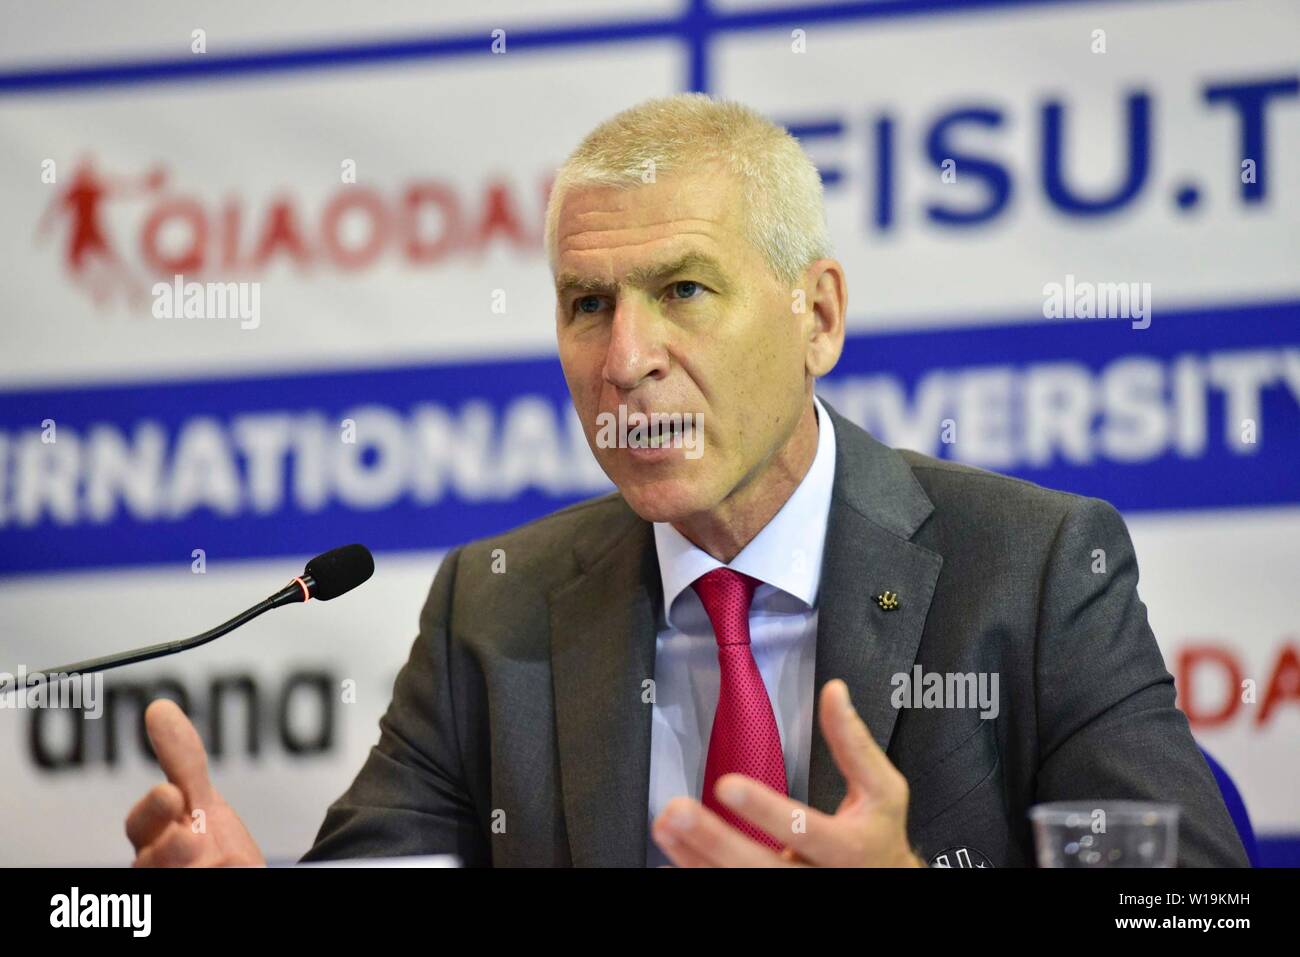 Napoli, Italy. 01st July, 2019. The President of the FISU Oleg Matytsin during the opening press conference of the 30th Summer Universiade Napoli 2019 at at the Media Press Center of the Mostra d'Oltremare of Napoli Credit: Paola Visone/Pacific Press/Alamy Live News Stock Photo